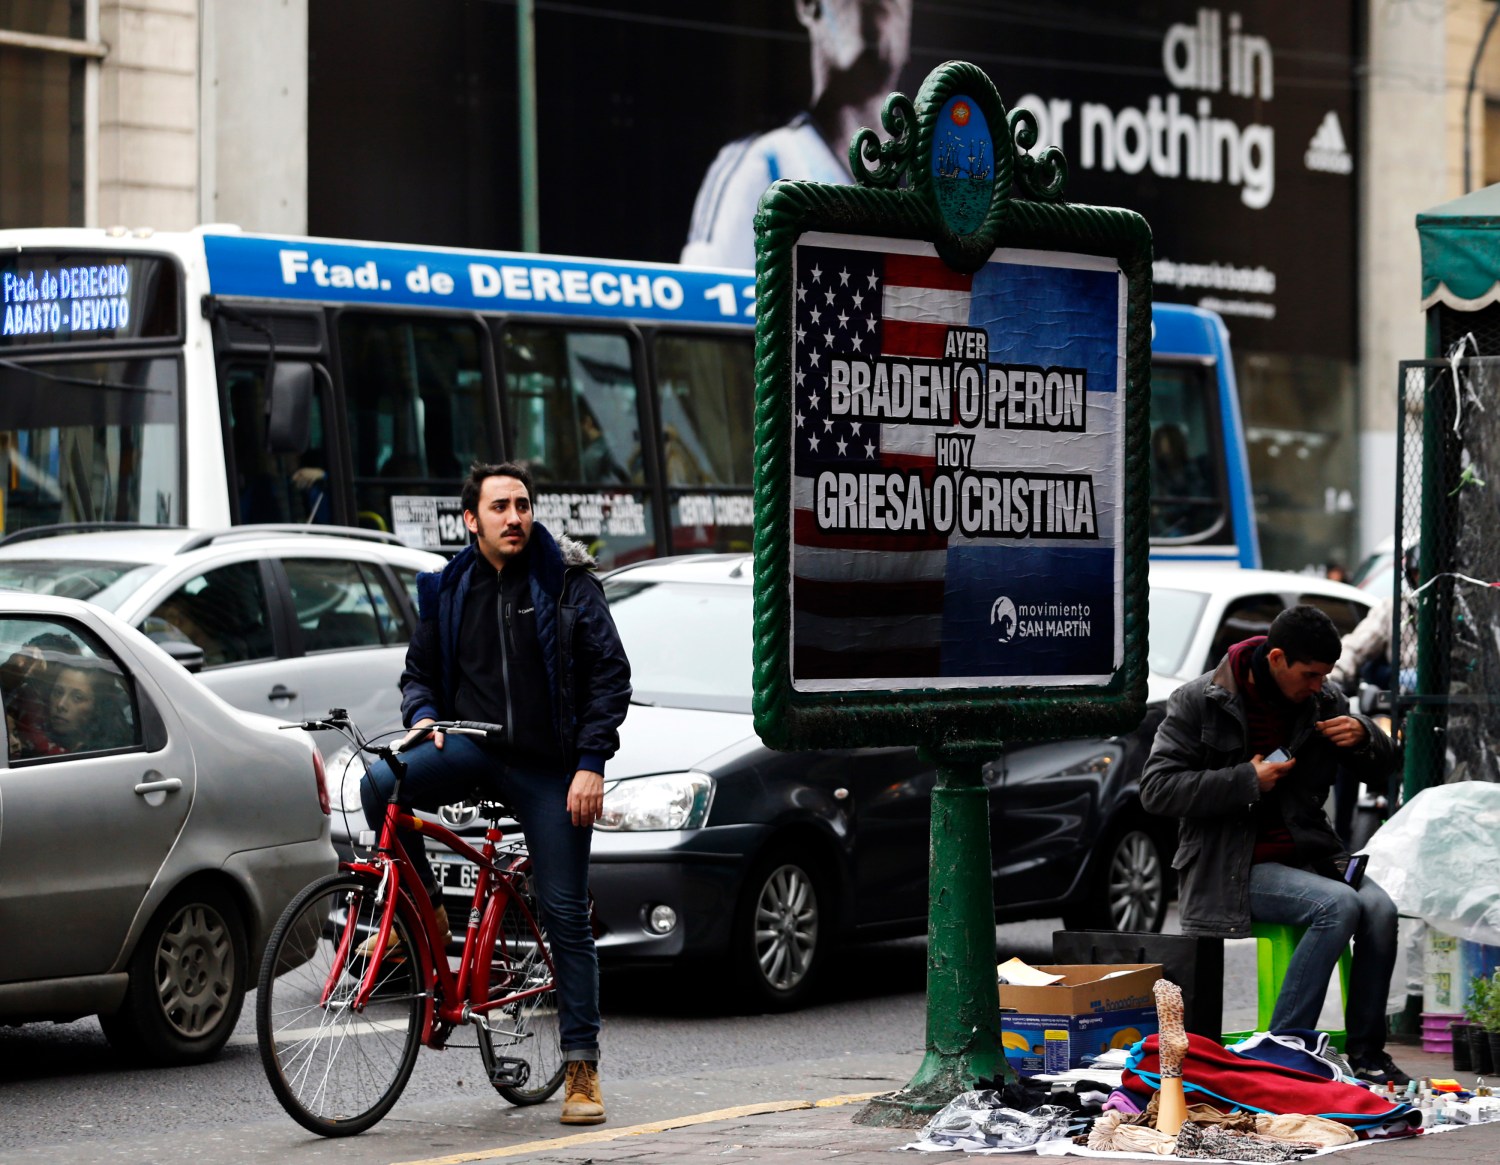 A man looks at a poster placed on an advertising board that reads "Yesterday, Braden or Peron - Today: Griesa or Cristina", in Buenos Aires July 29, 2014. Argentine debt negotiators held talks in New York on Tuesday with the U.S. mediator in the South American country's battle with holdout investors, in a last-ditch attempt to avert a default. After a series of setbacks in U.S. courts, Argentina has until the end of Wednesday to either pay the New York hedge funds in full their defaulted bonds resulting from the country's 2001/02 financial crisis or cut a deal to stave off a fresh default. The poster refers to 1945 U.S. Ambassador in Argentina Braden Spruille, former Argentina's President Juan Peron, U.S. District Court for the Southern District of New York Judge Thomas Griesa and President of Argentina  Cristina Fernandez de Kirchner.   REUTERS/Marcos Brindicci (ARGENTINA - Tags: POLITICS BUSINESS SOCIETY) - GM1EA7U09E501